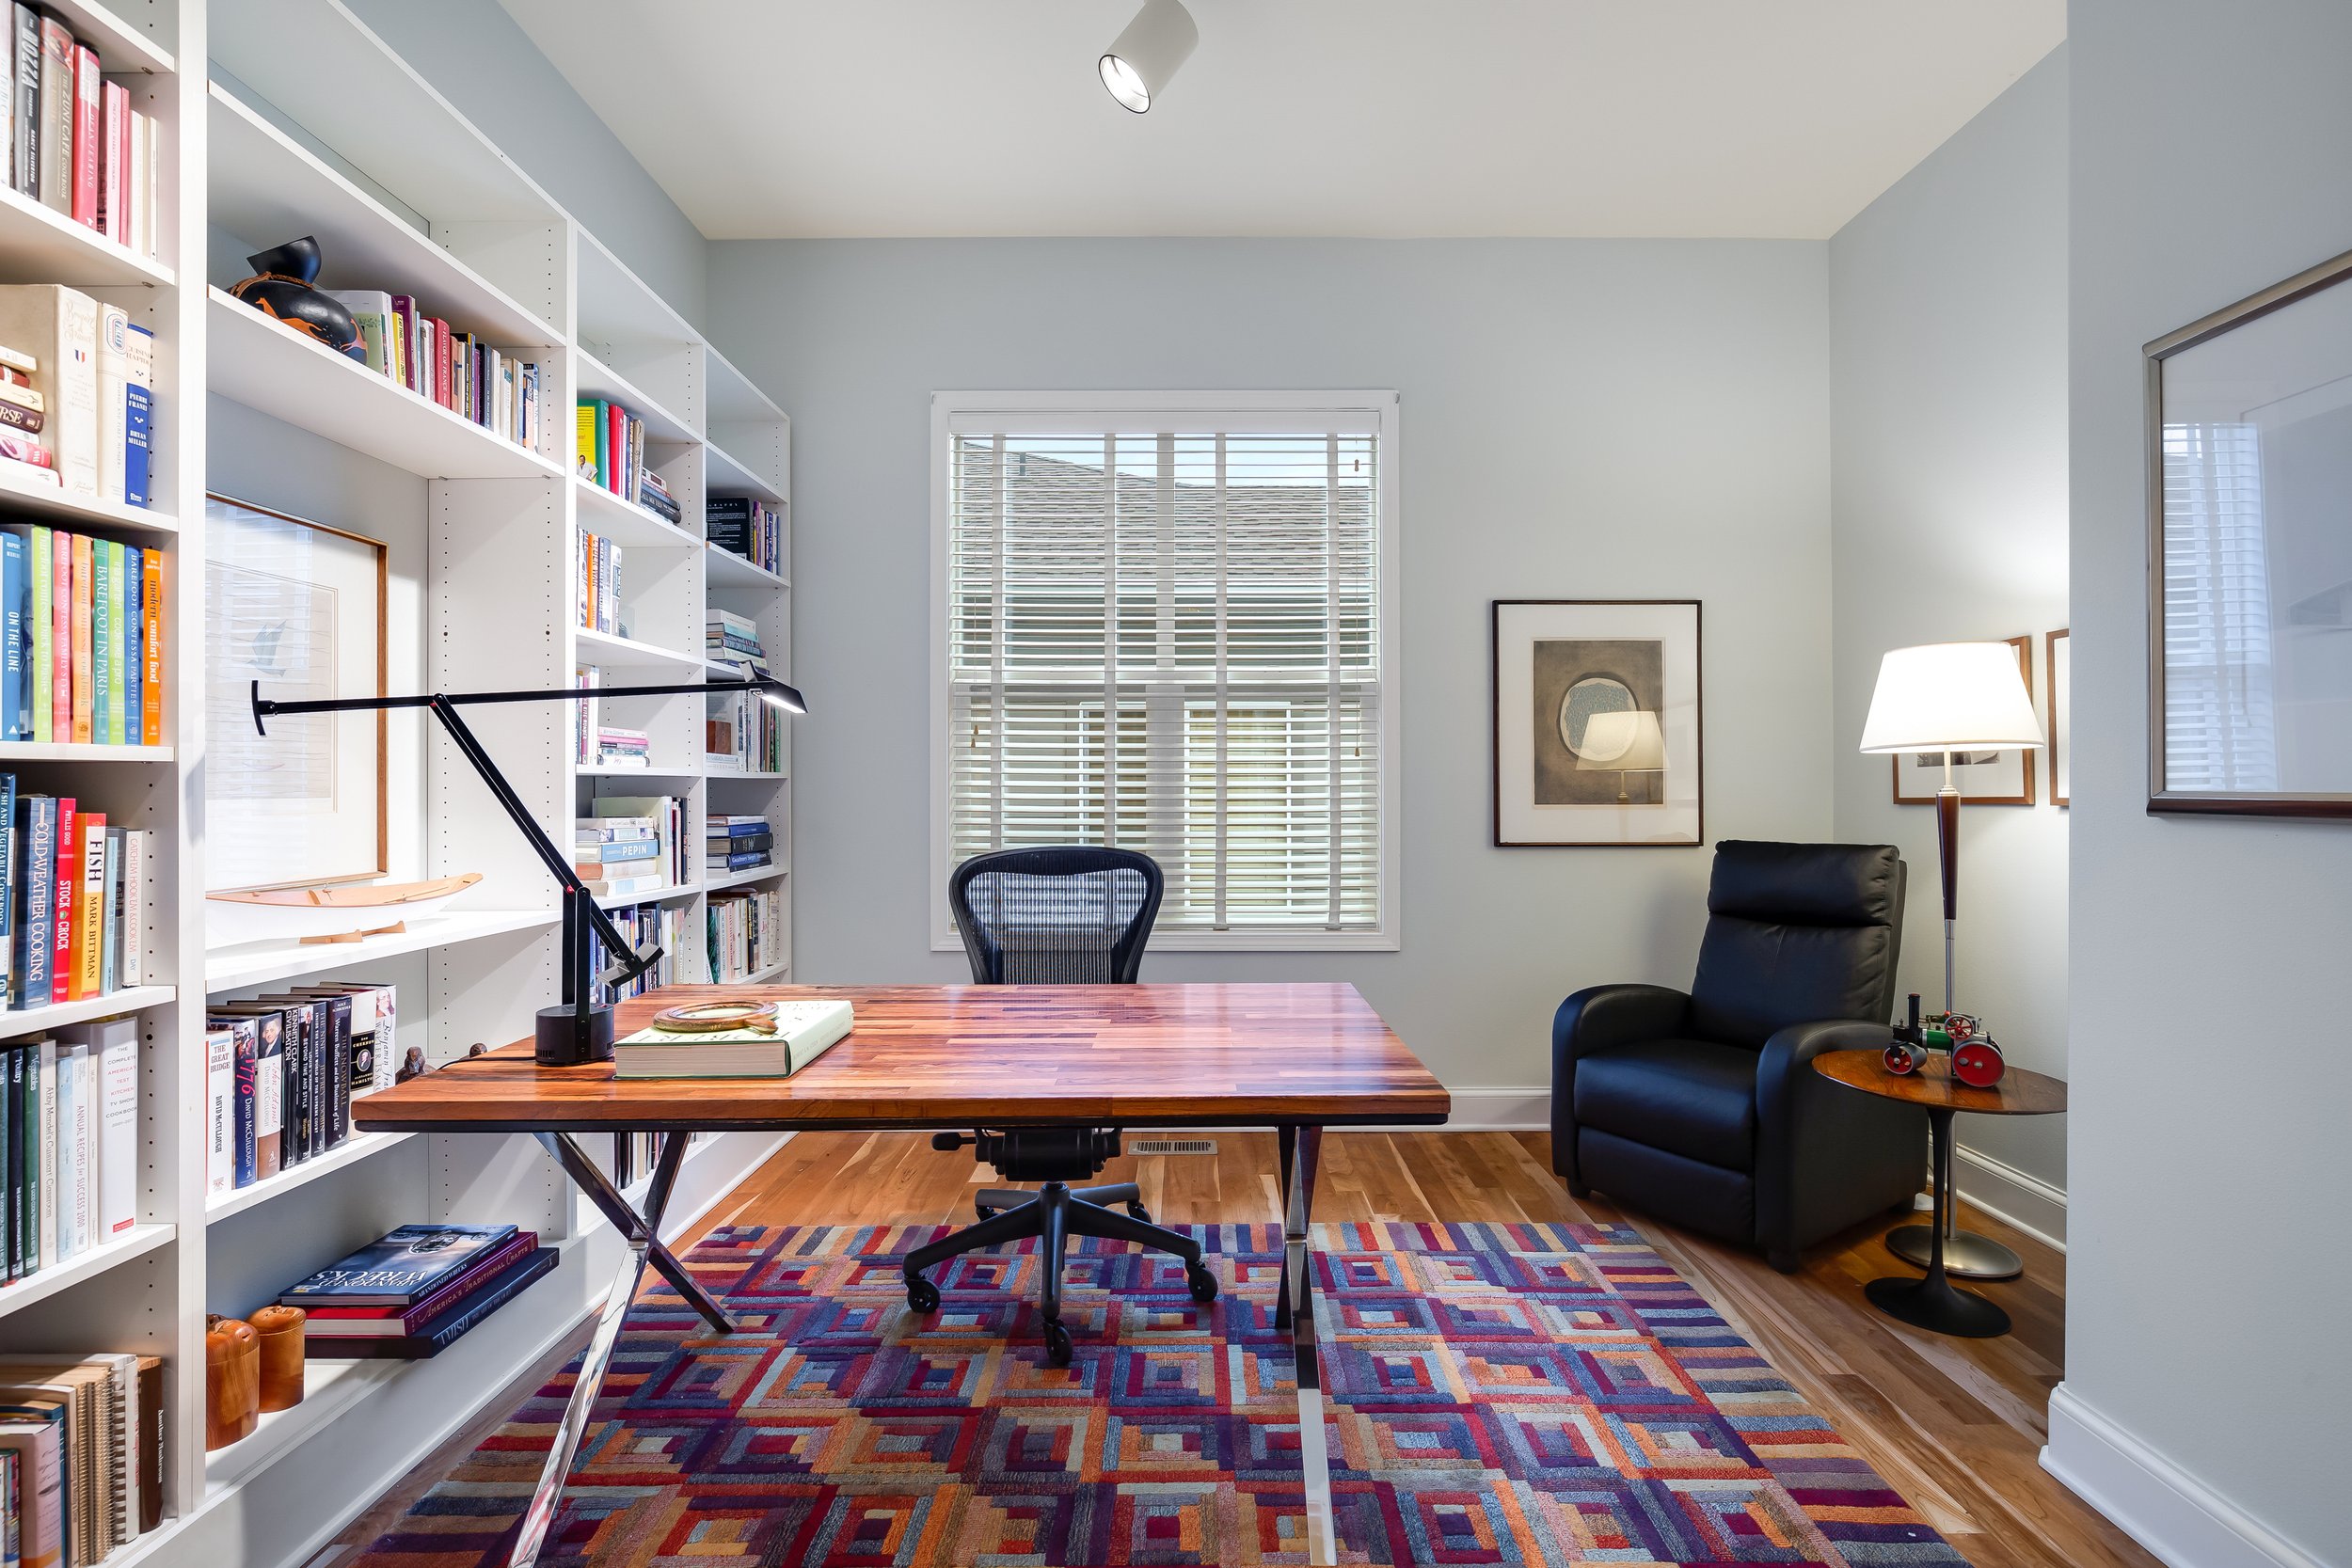  interior of office with large bookshelf, window, rug, and desk with chair 